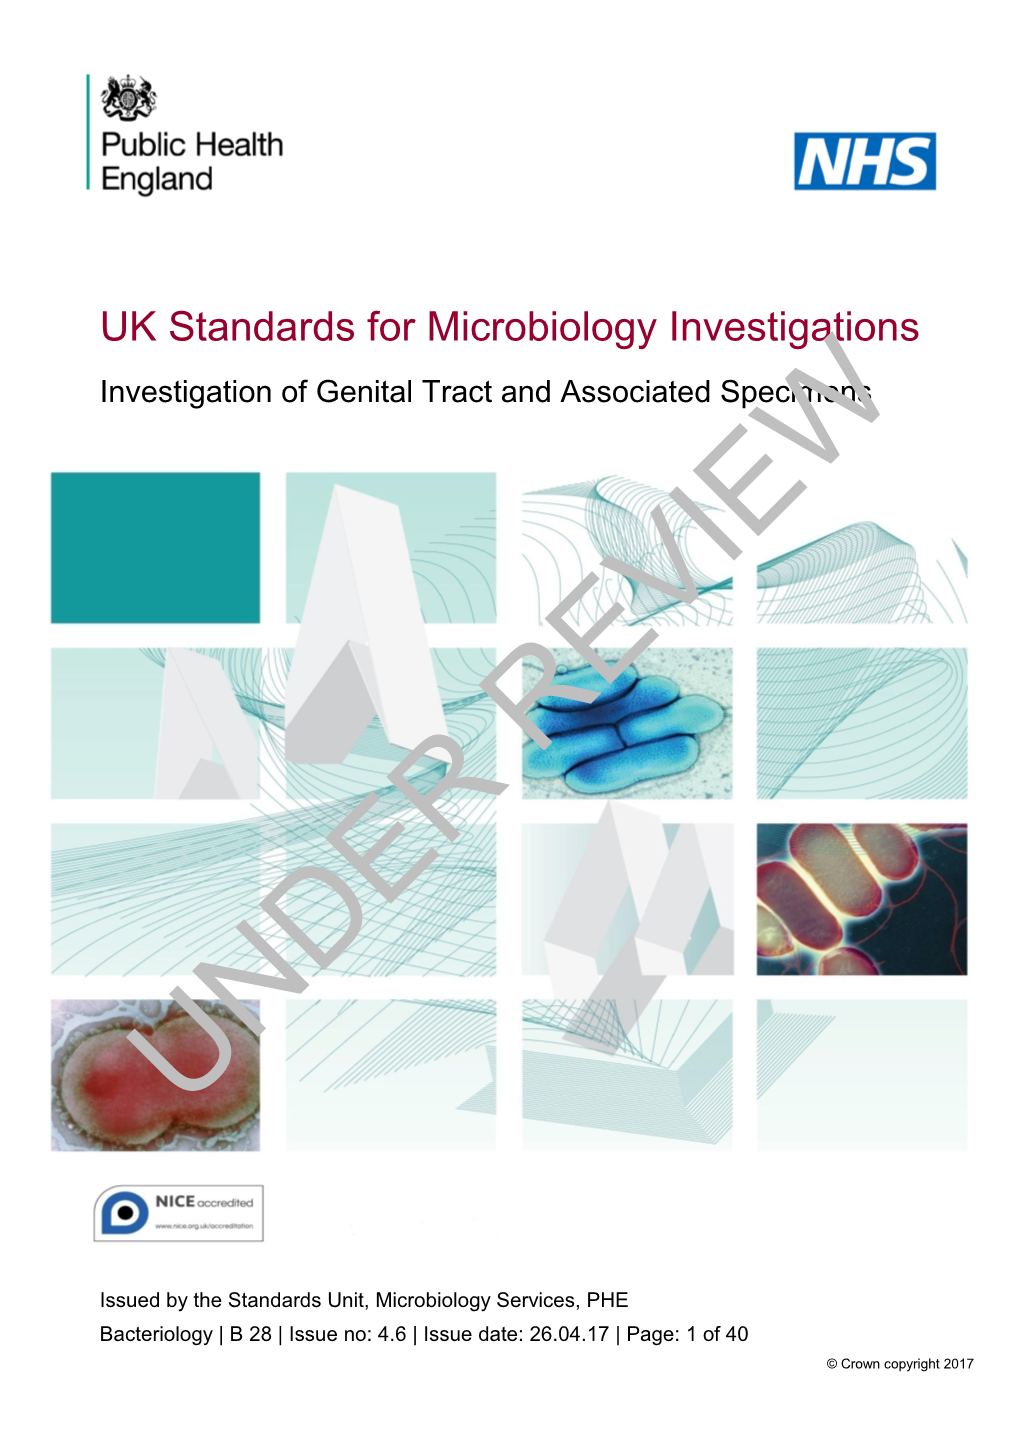 Investigation of Genital Tract and Associated Specimens